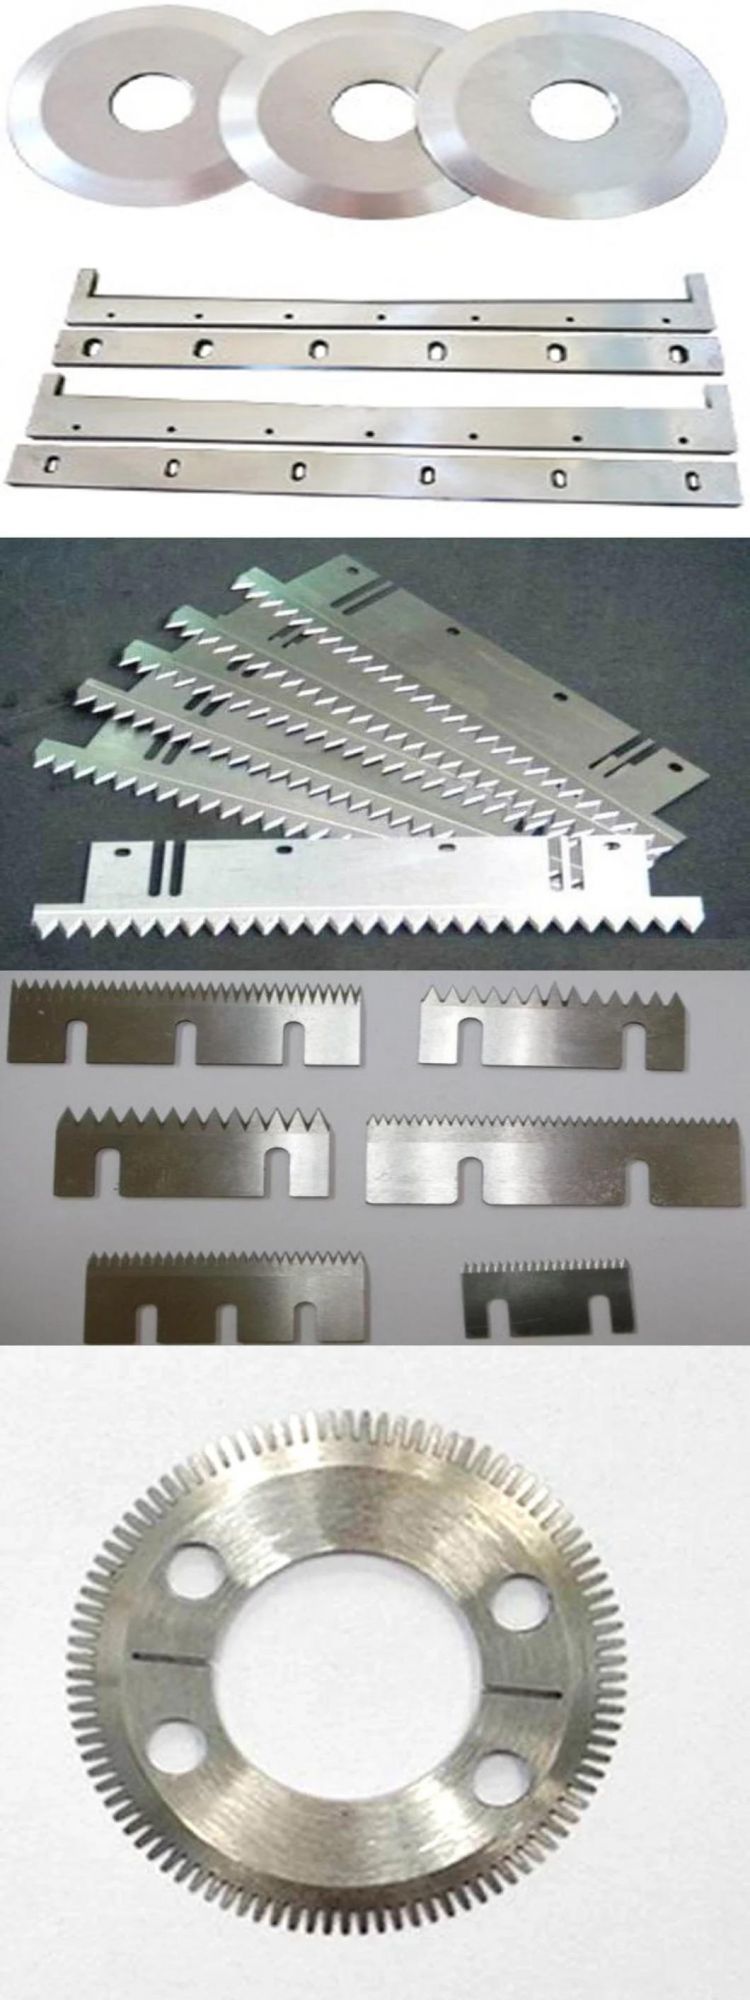 China Factory Long Serrated Machine Blade for Packing